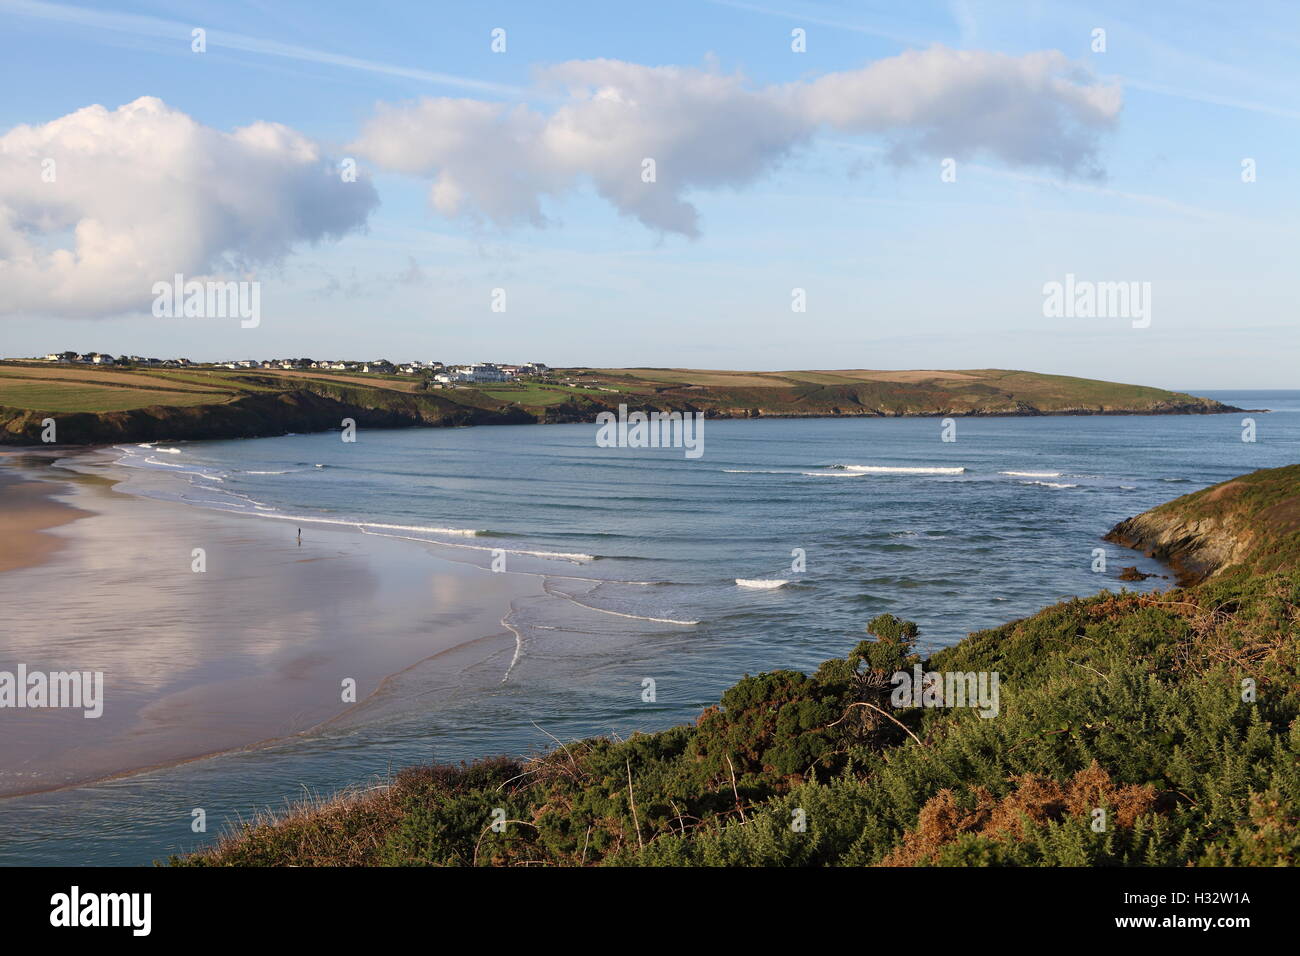 PENTIRE, NEWQUAY, CORNWALL, UK - OCTOBER 3, 2016: Early morning views along Pentire in Newquay, and out over the River Gannel es Stock Photo